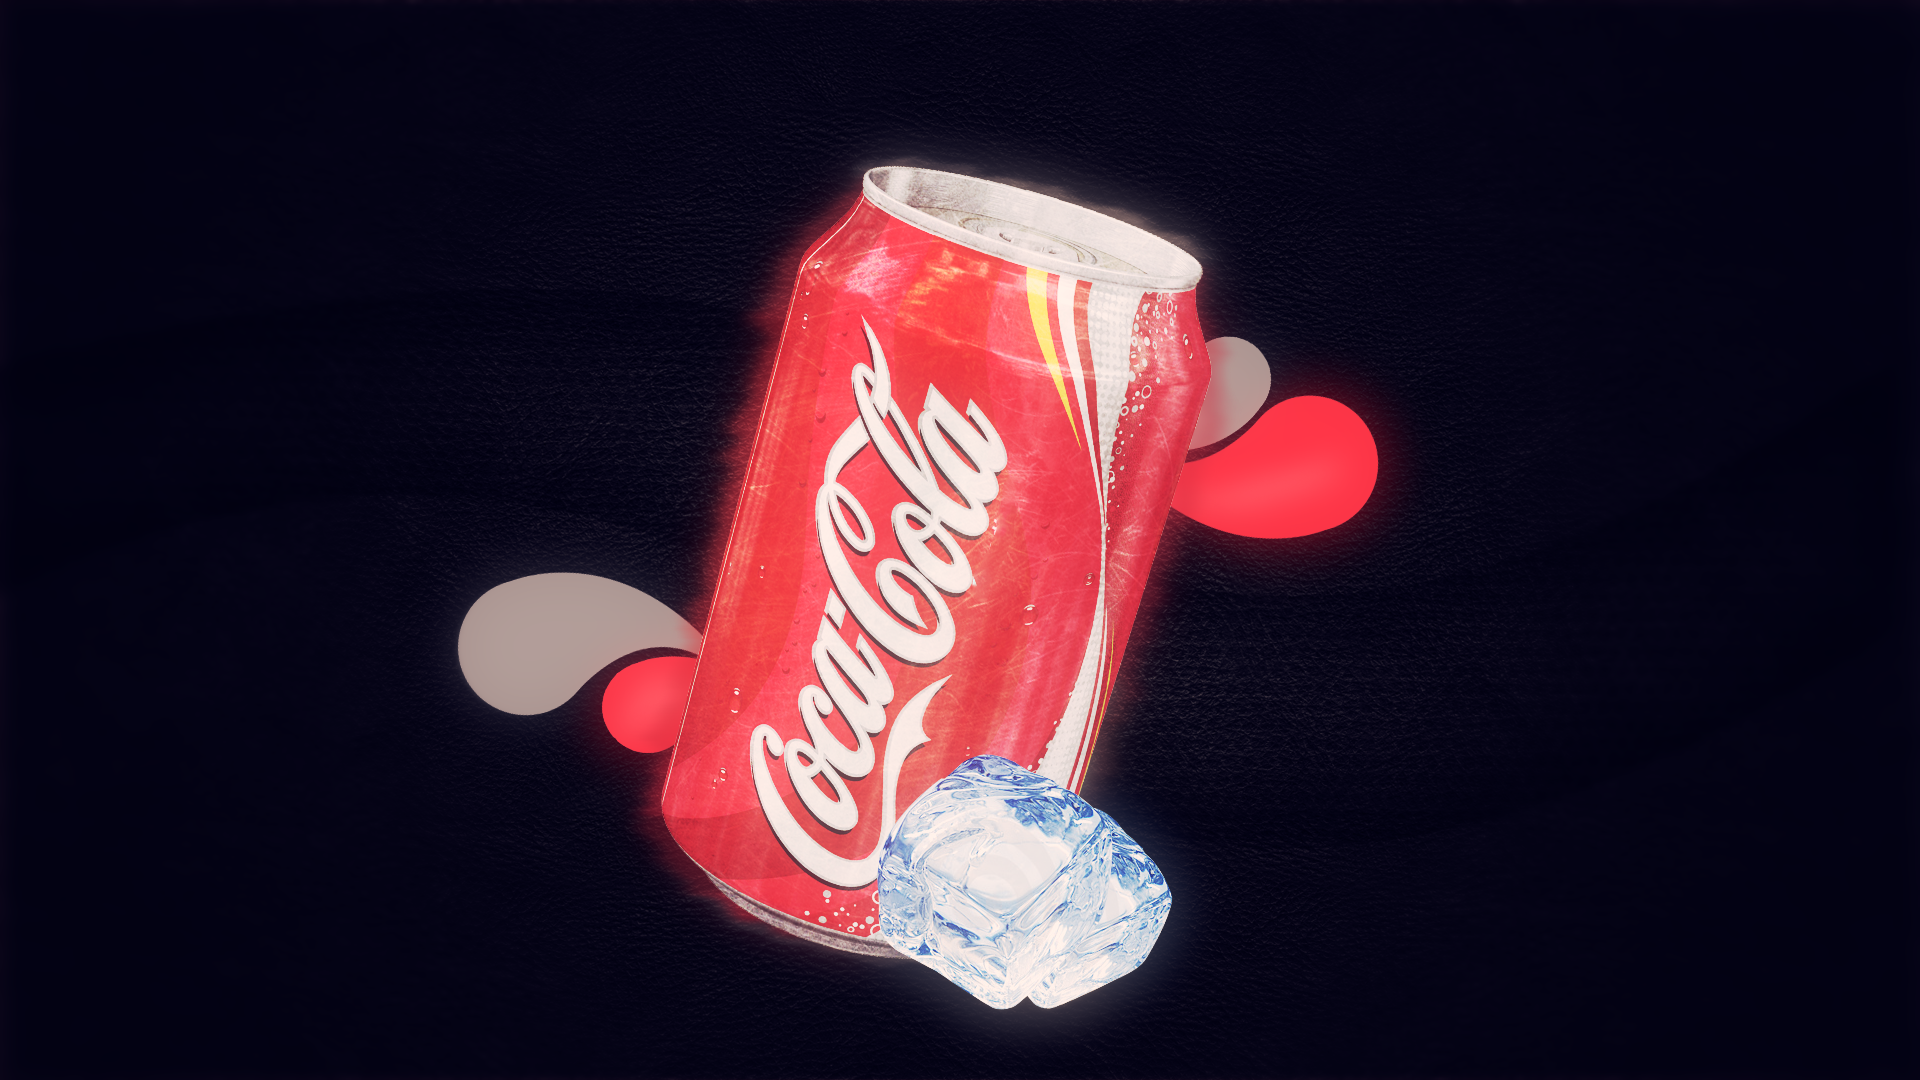 General 1920x1080 can artwork ice cubes simple background Coca-Cola blue background brand advertisements